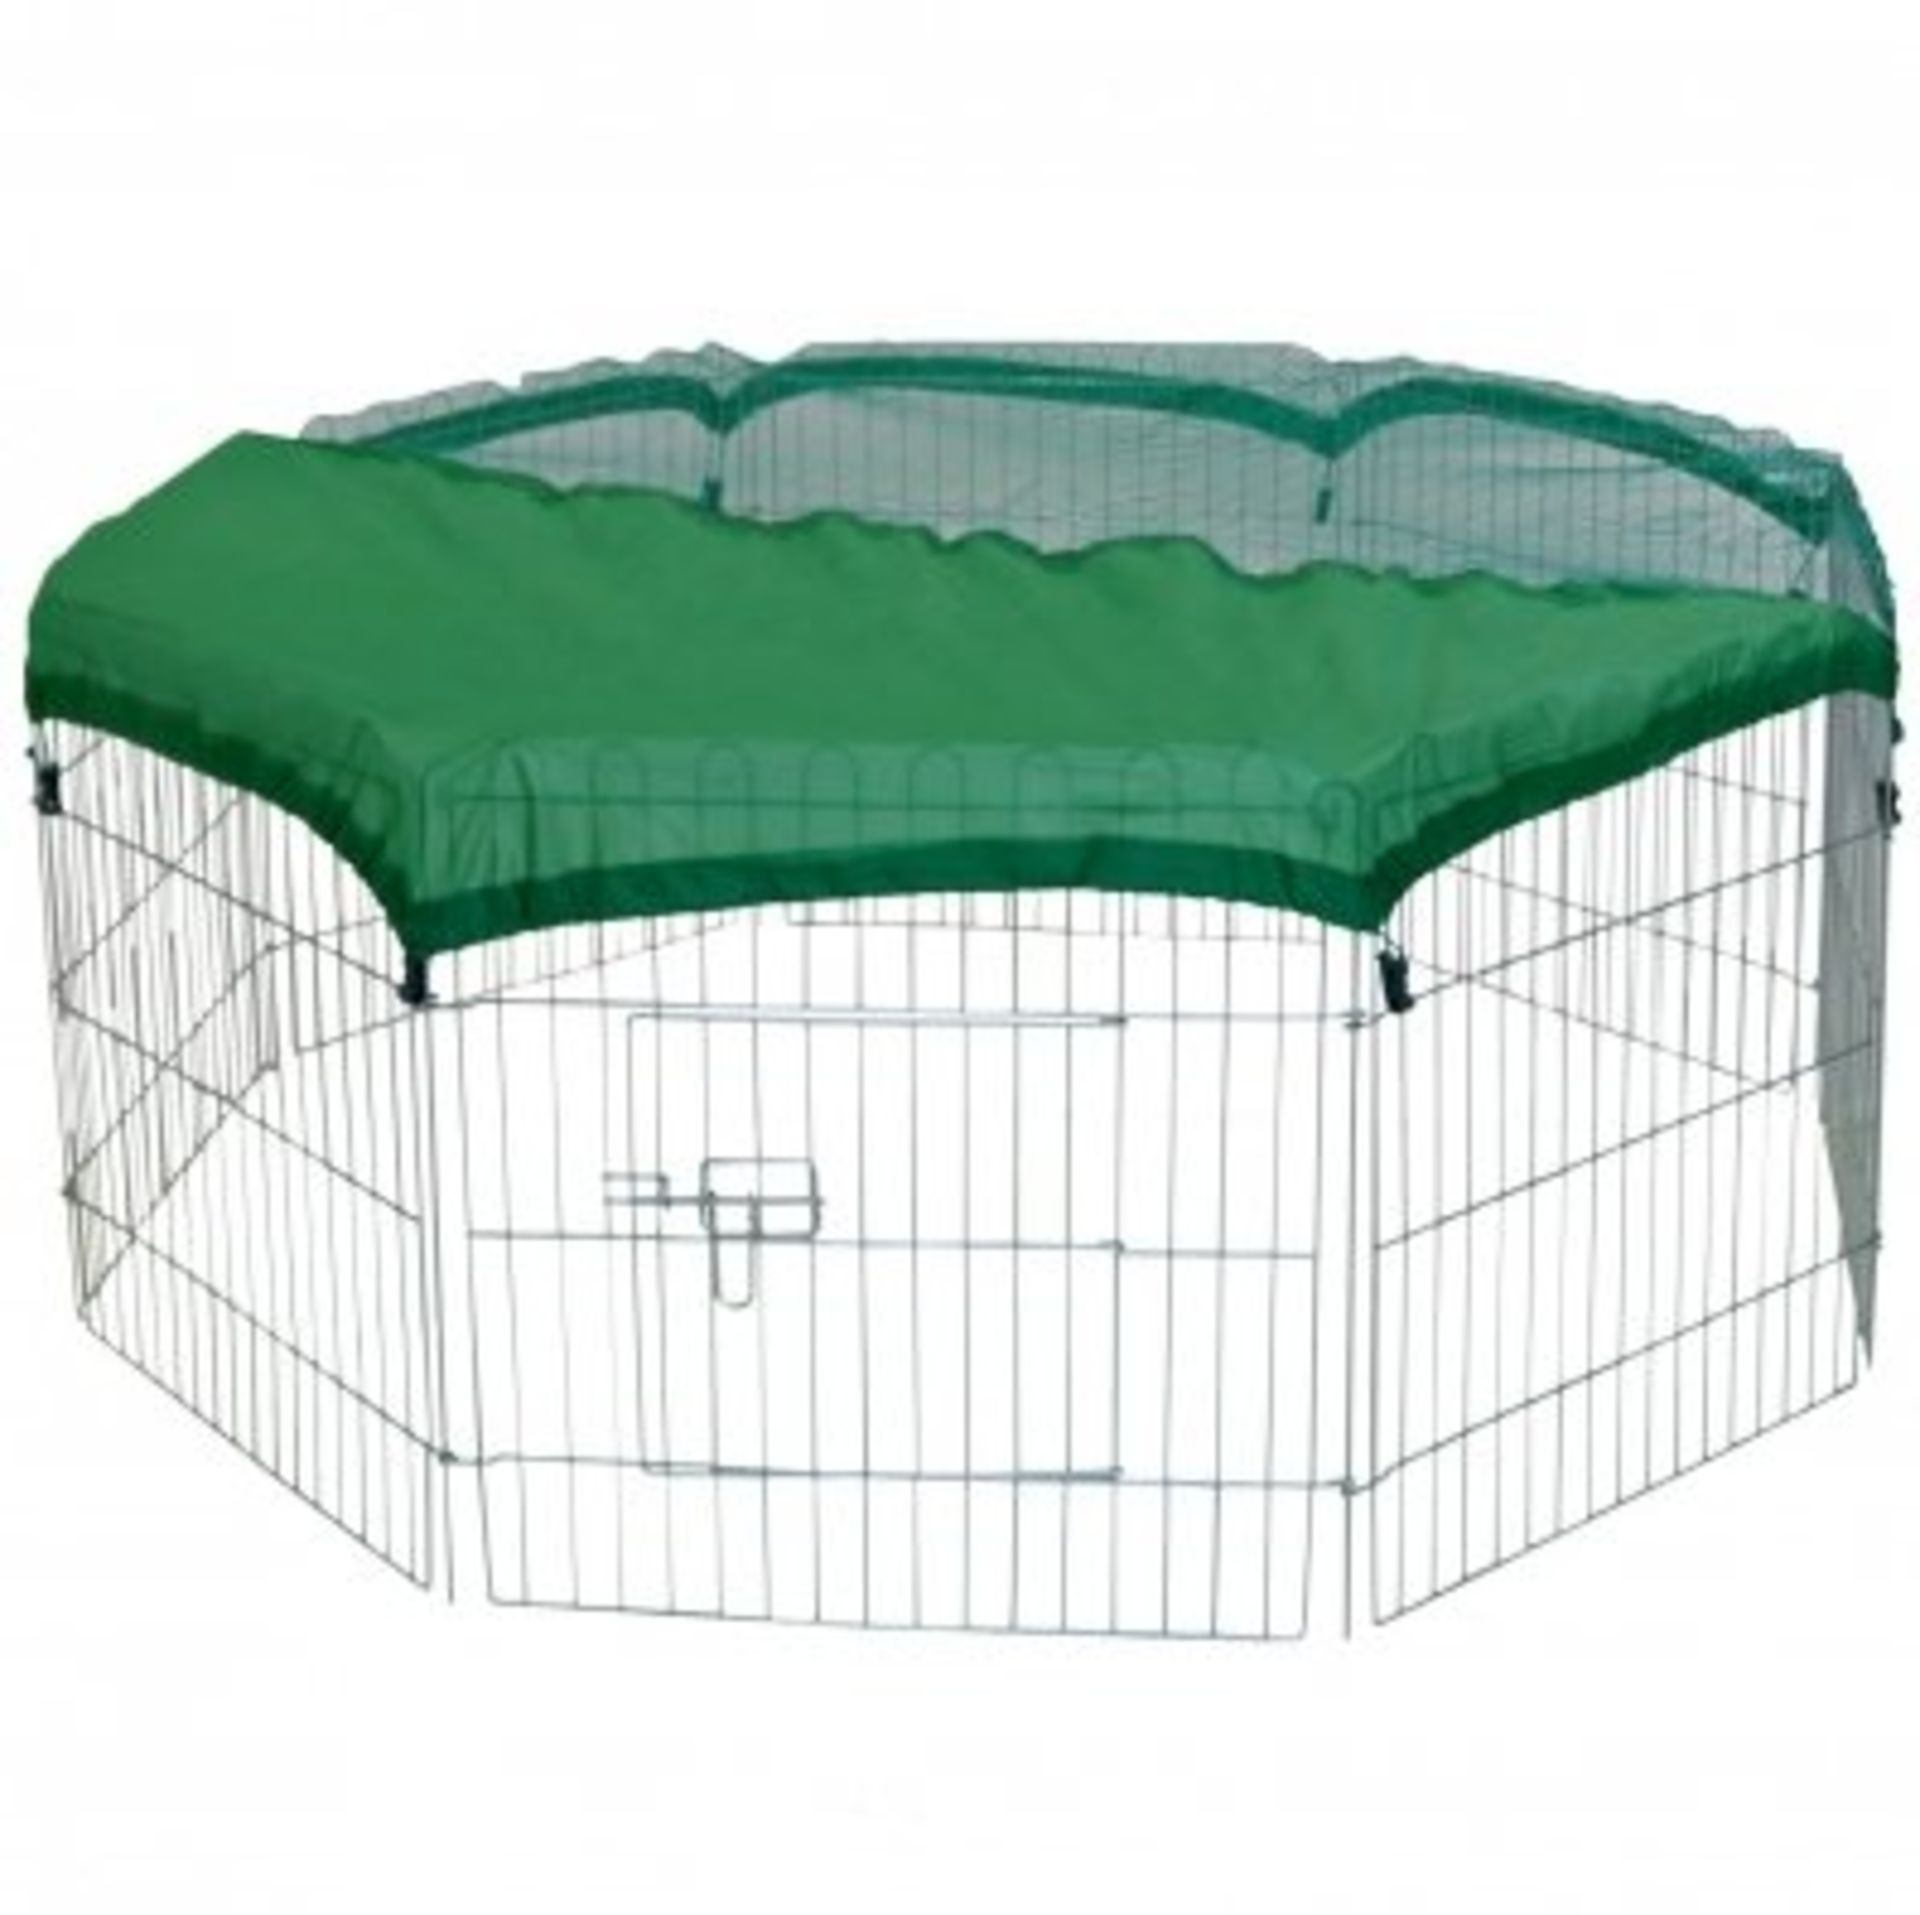 (RU285) 8 Panel Outdoor Rabbit Play Pen Run with Shade Safety Net The outdoor pen is perfect...